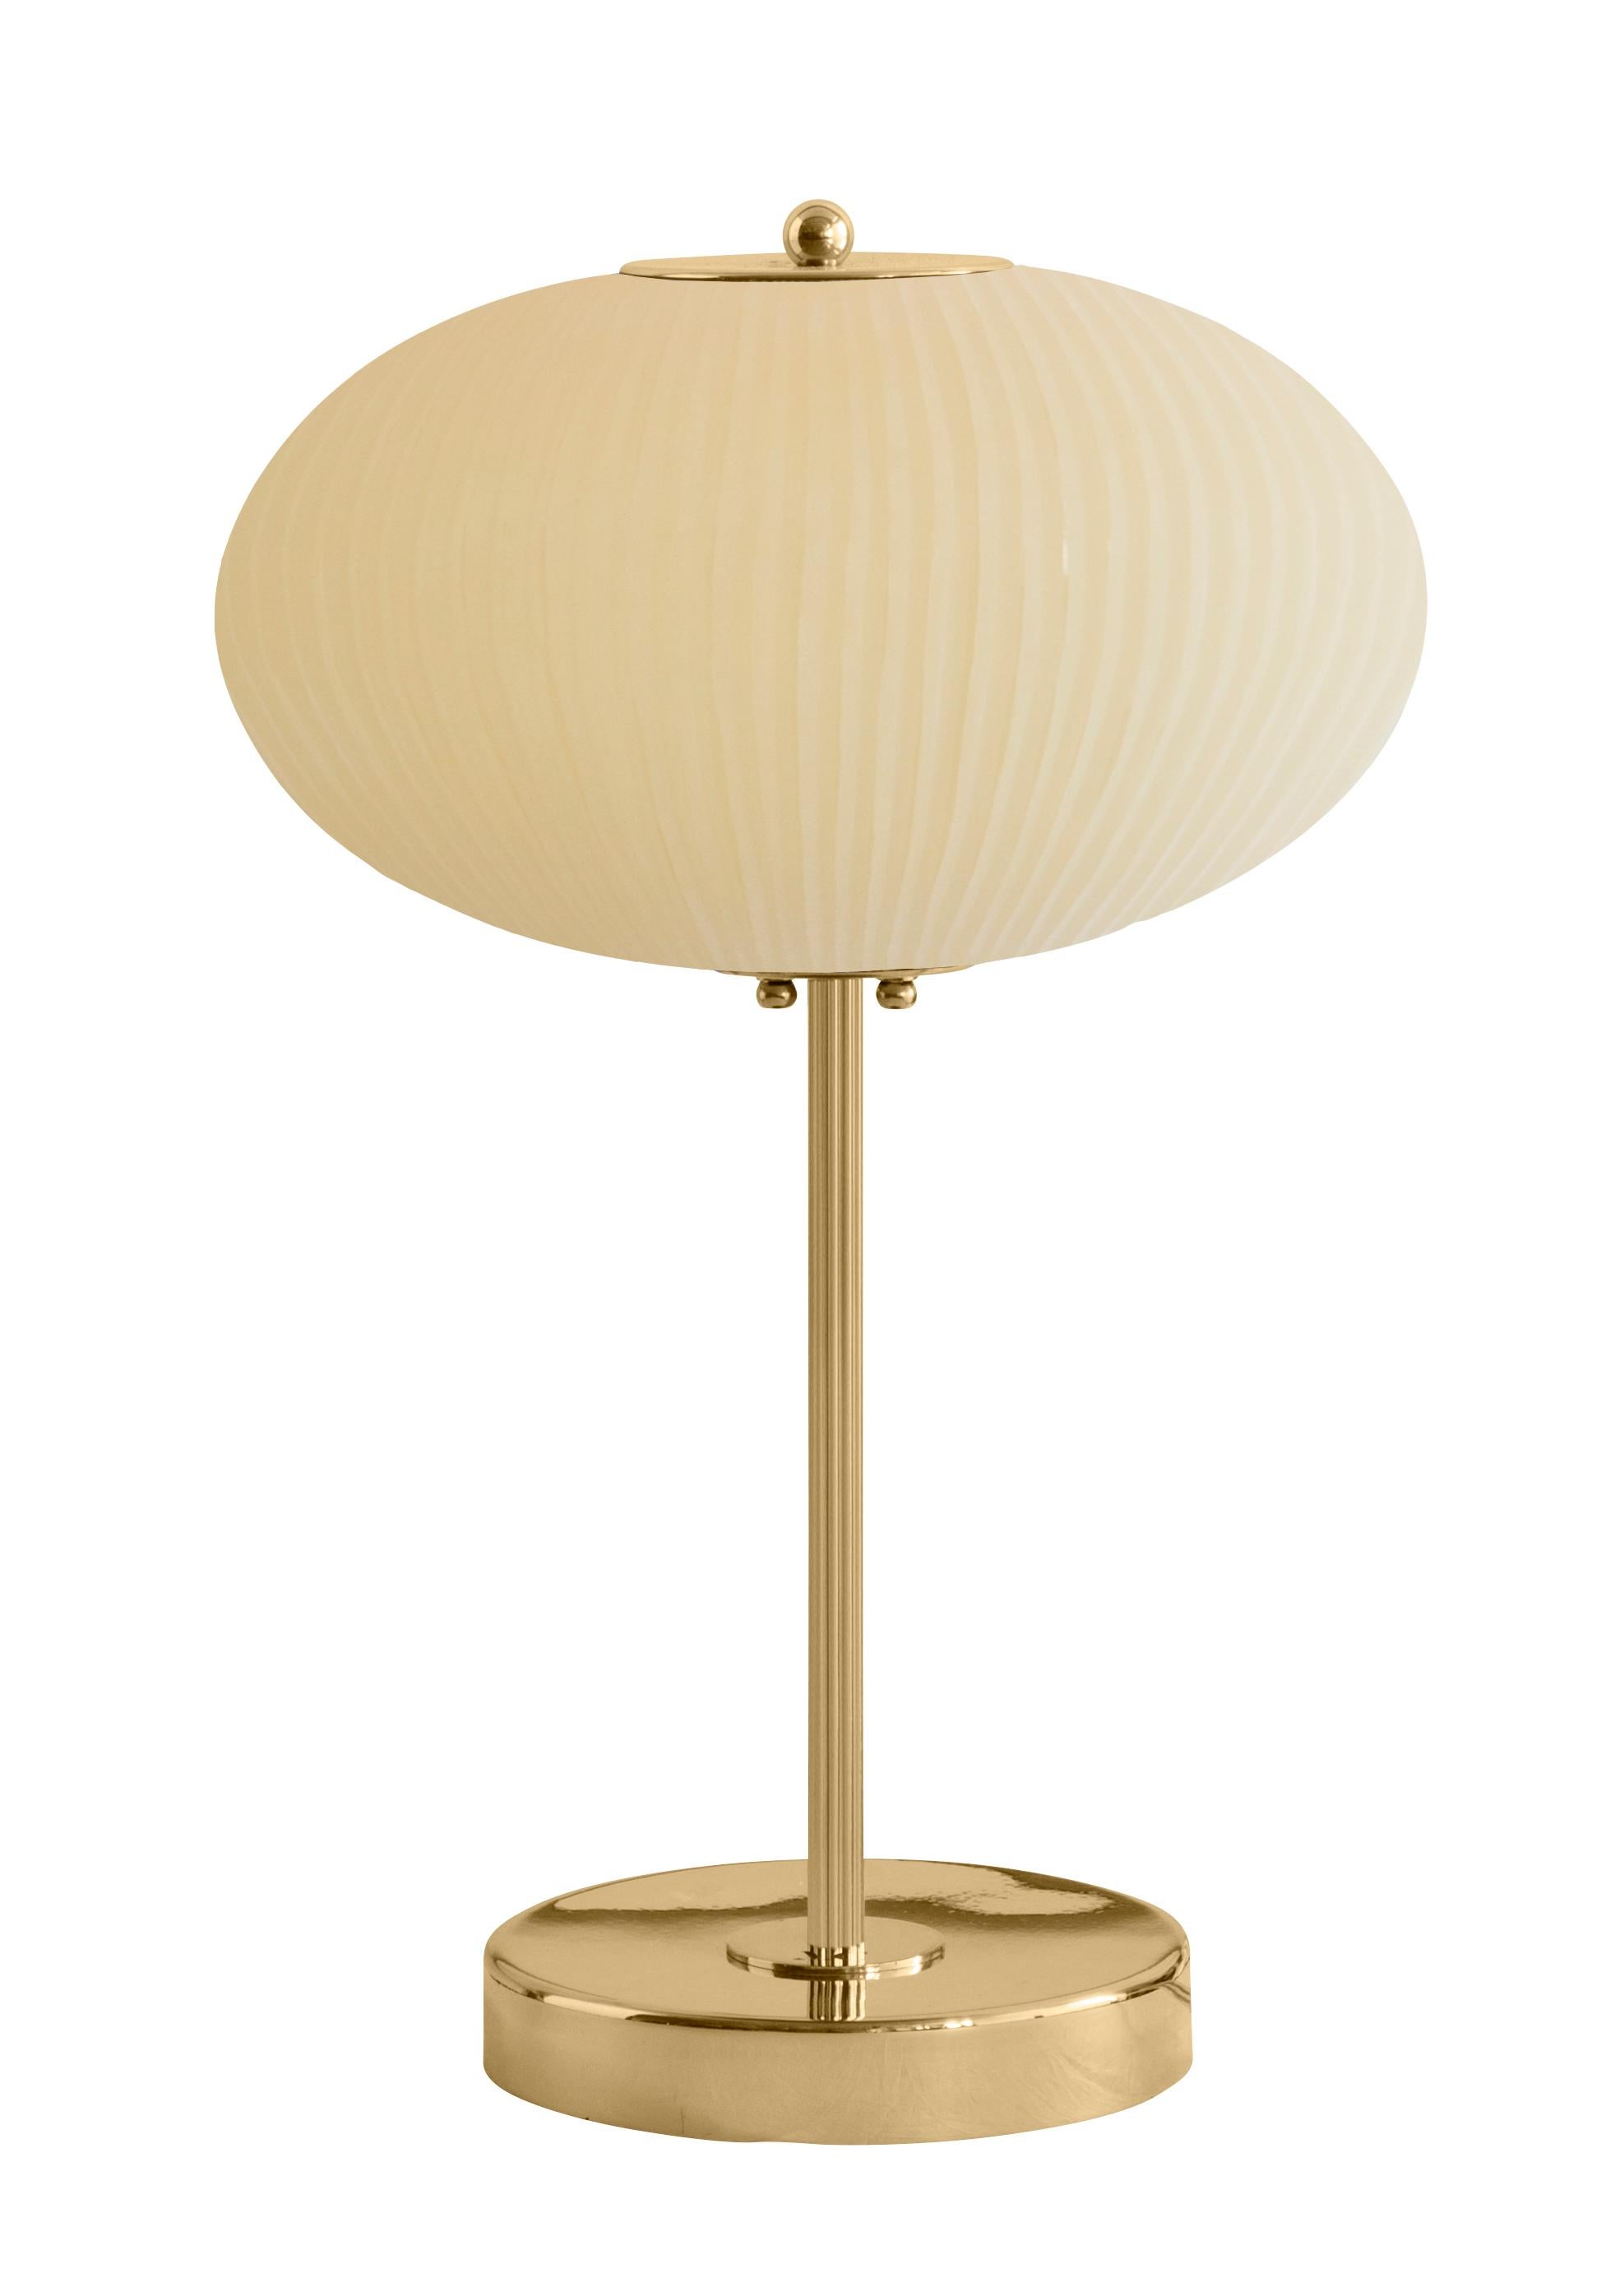 Table lamp China 07 by Magic Circus Editions
Dimensions: H 50 x W 32 x D 32 cm
Materials: Brass, mouth blown glass sculpted with a diamond saw
Colour: mustard

Available finishes: Brass, nickel
Available colours: enamel soft white, soft rose,